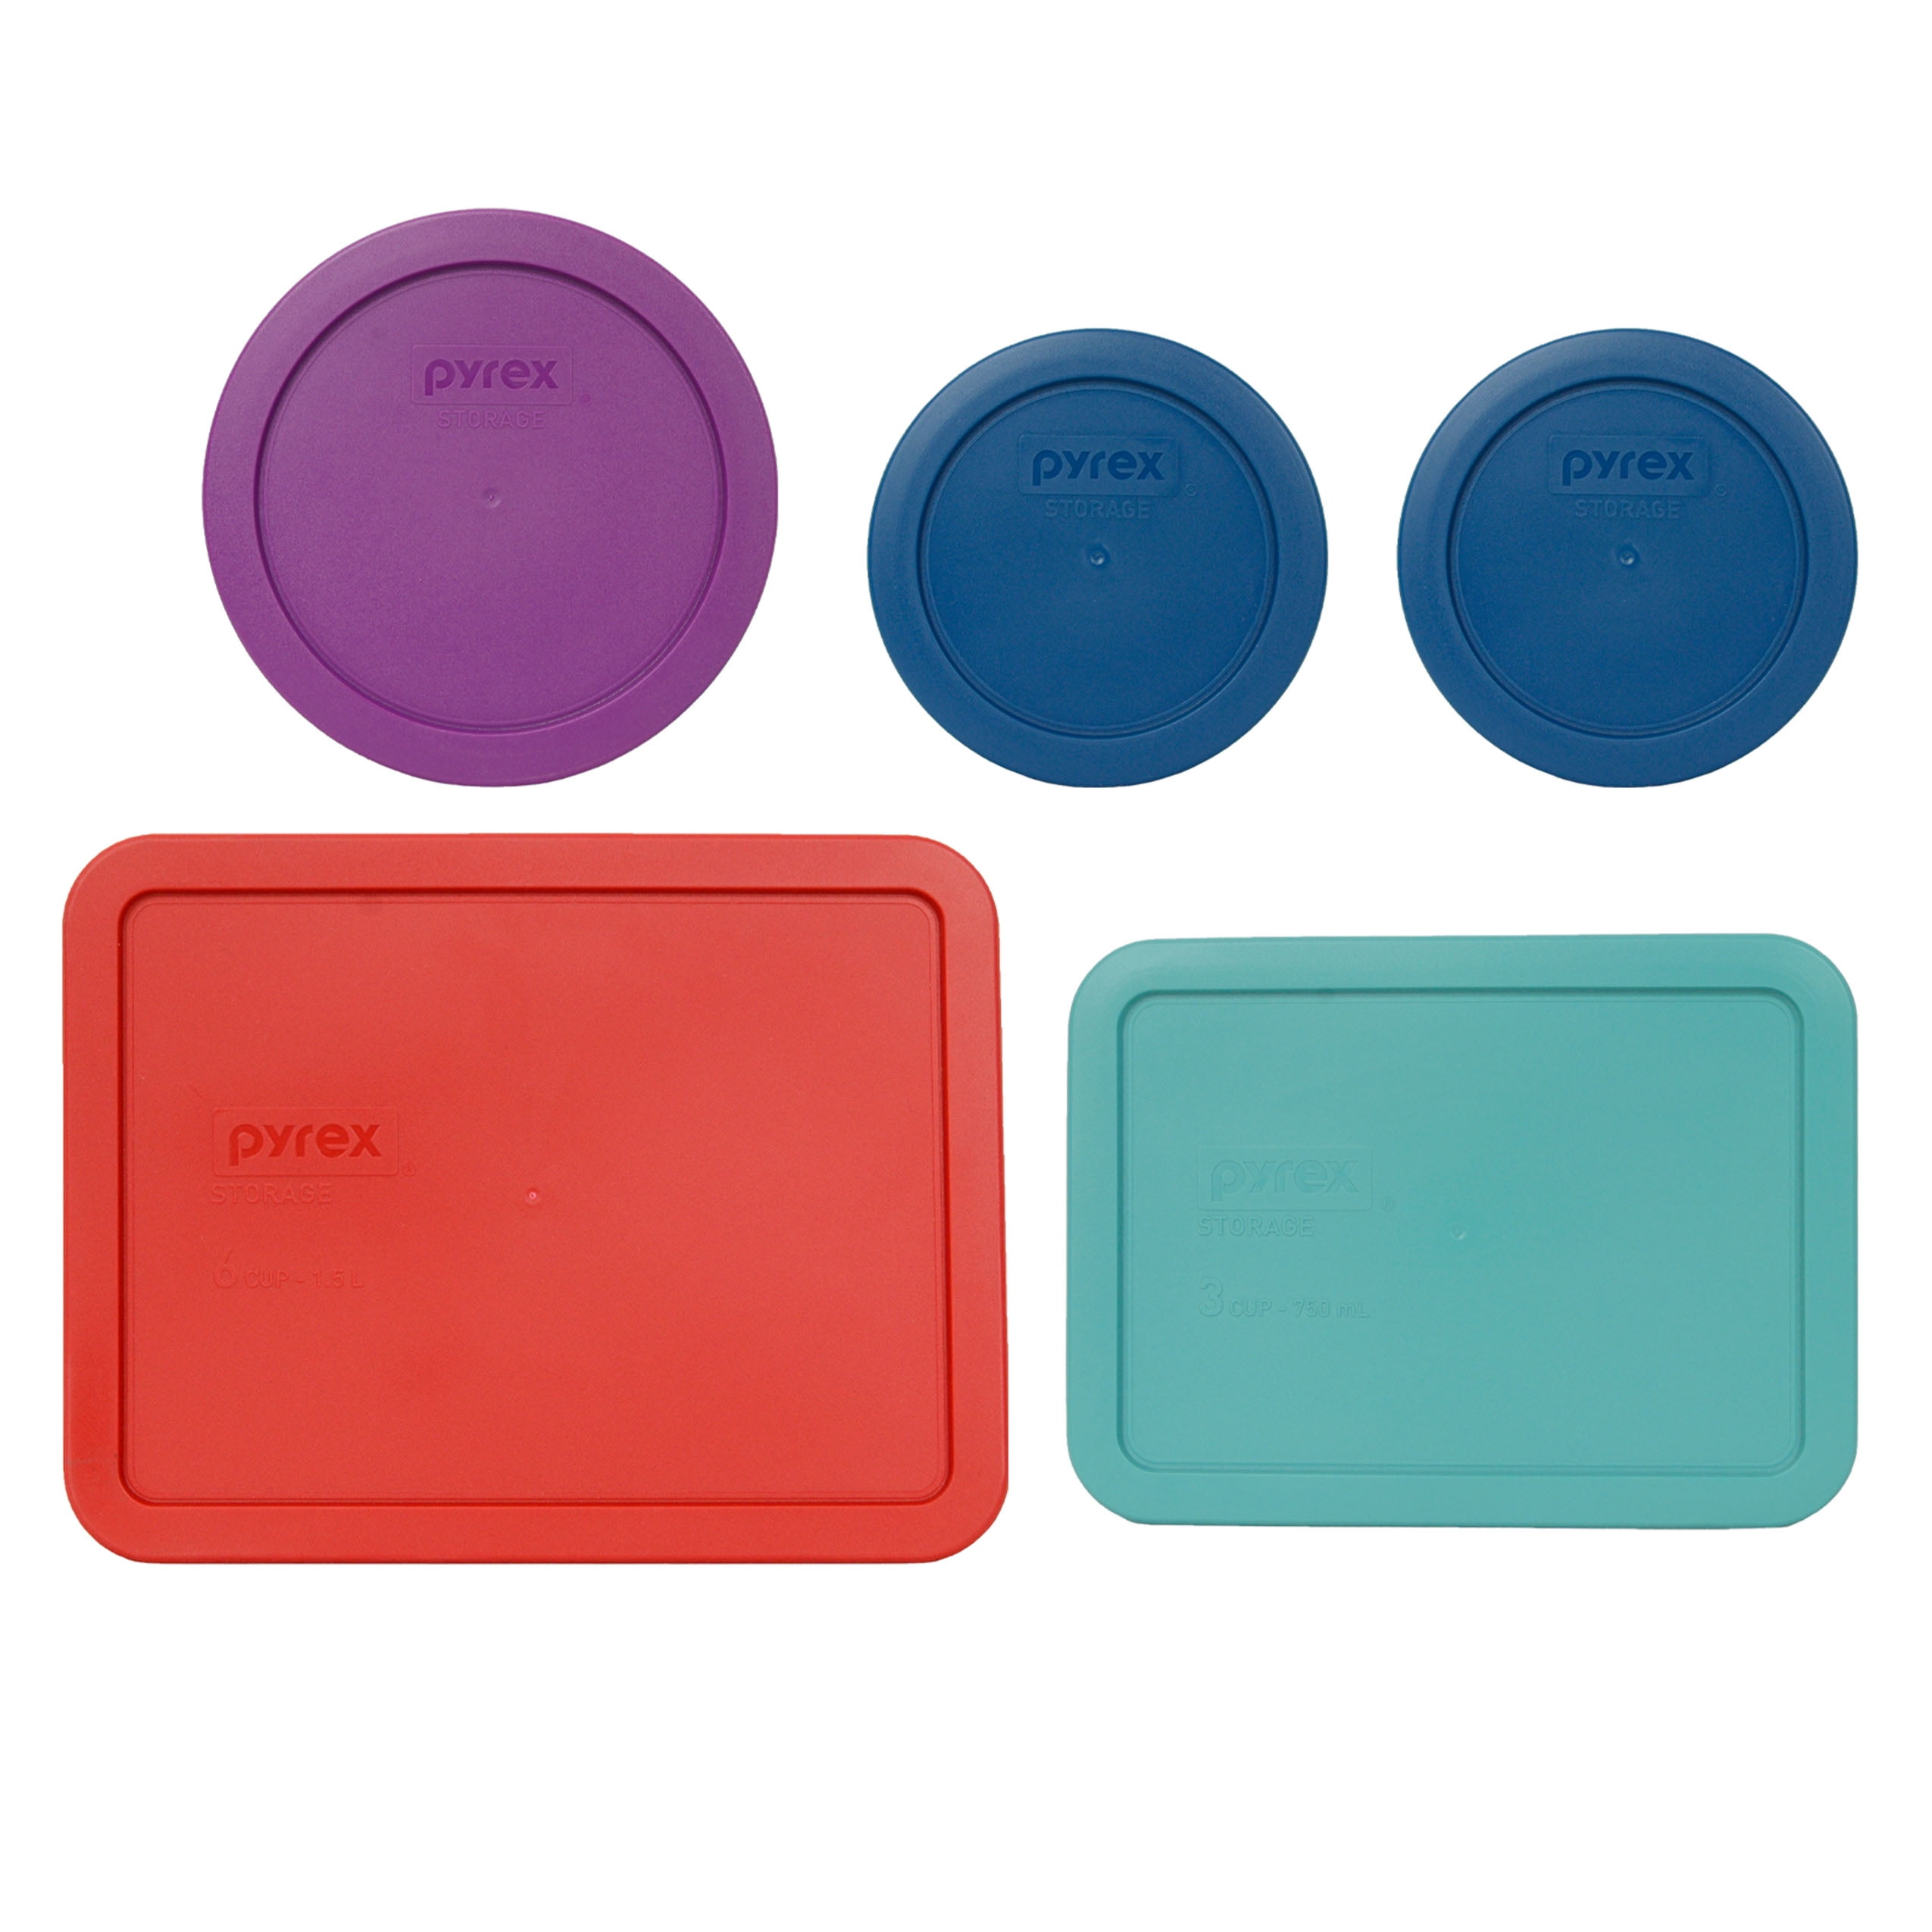 1 Pyrex 7201-PC 4 Cup 2 Pack Purple Round Plastic Lids 1 Turquoise